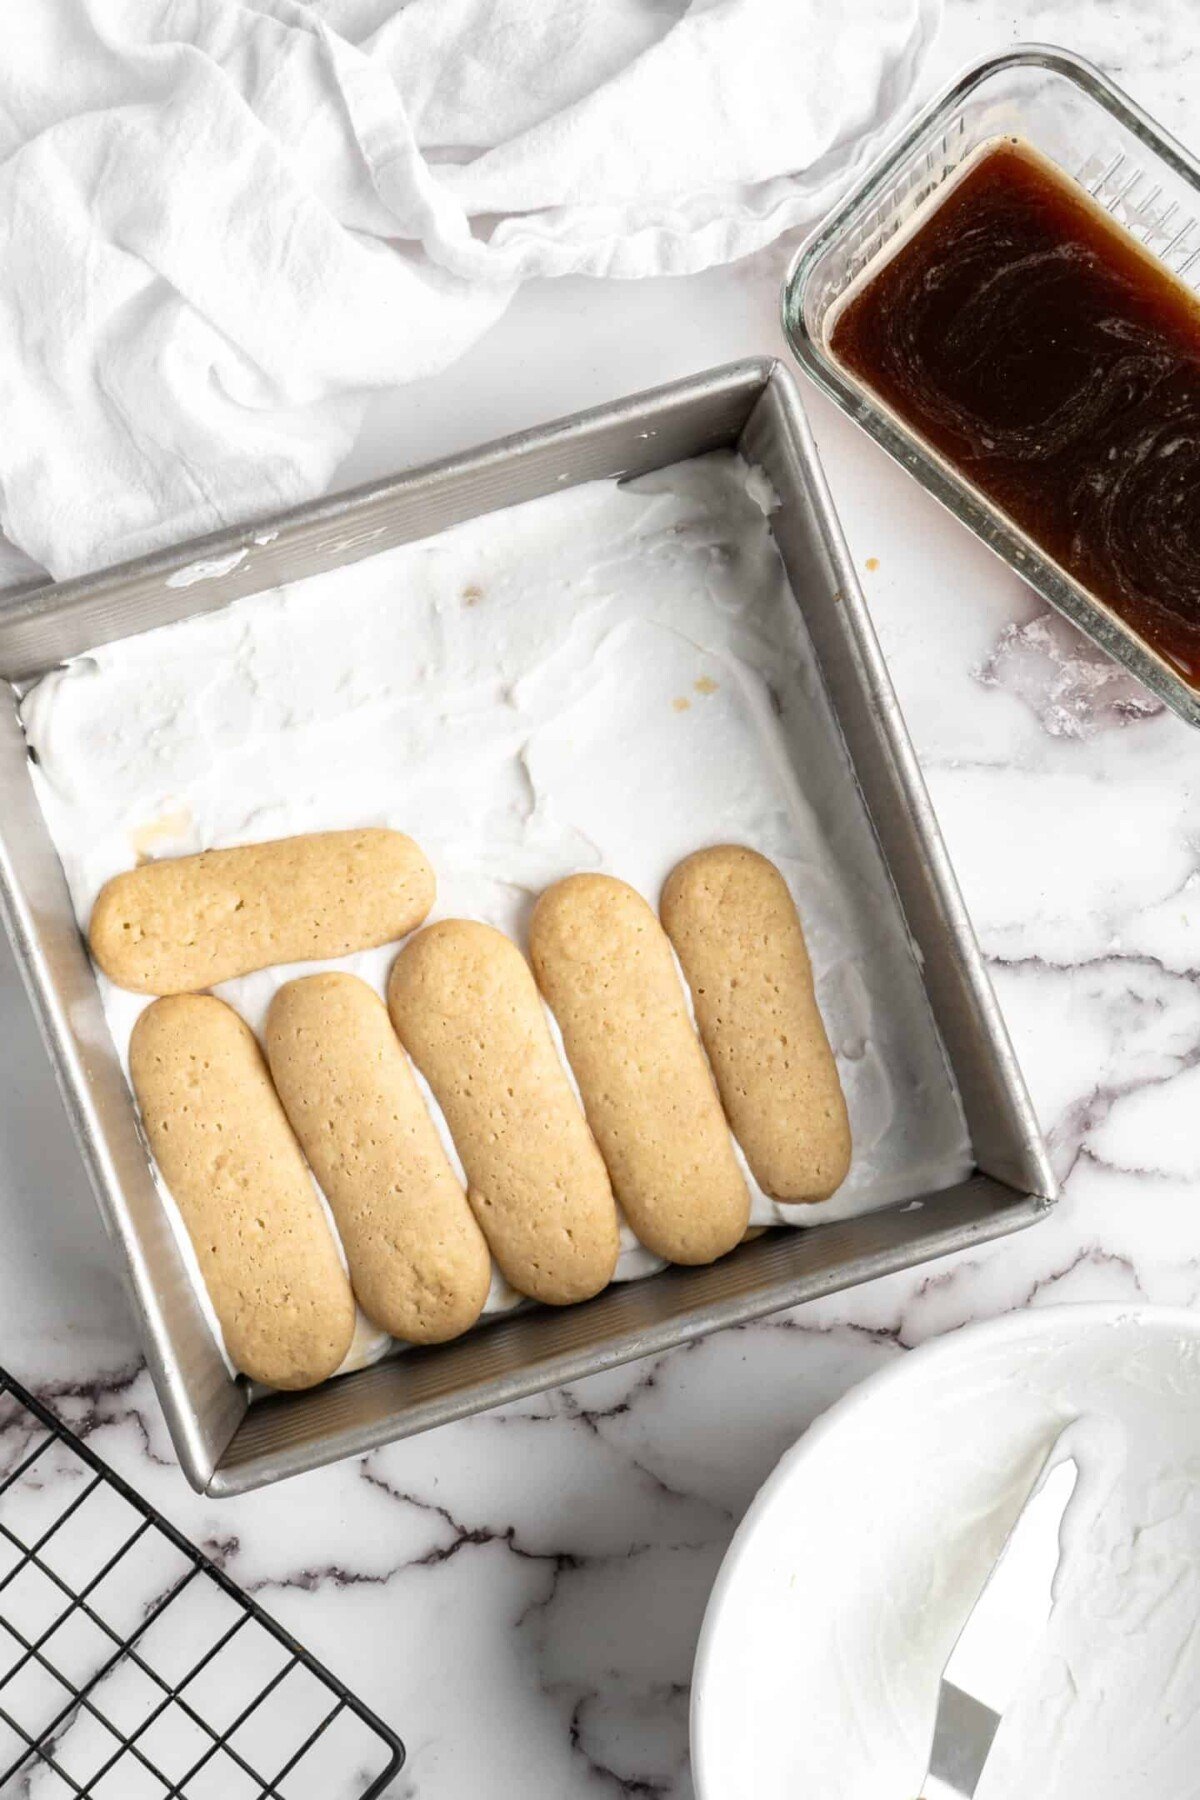 Six ladyfingers in a baking tray on top of a layer of mascarpone